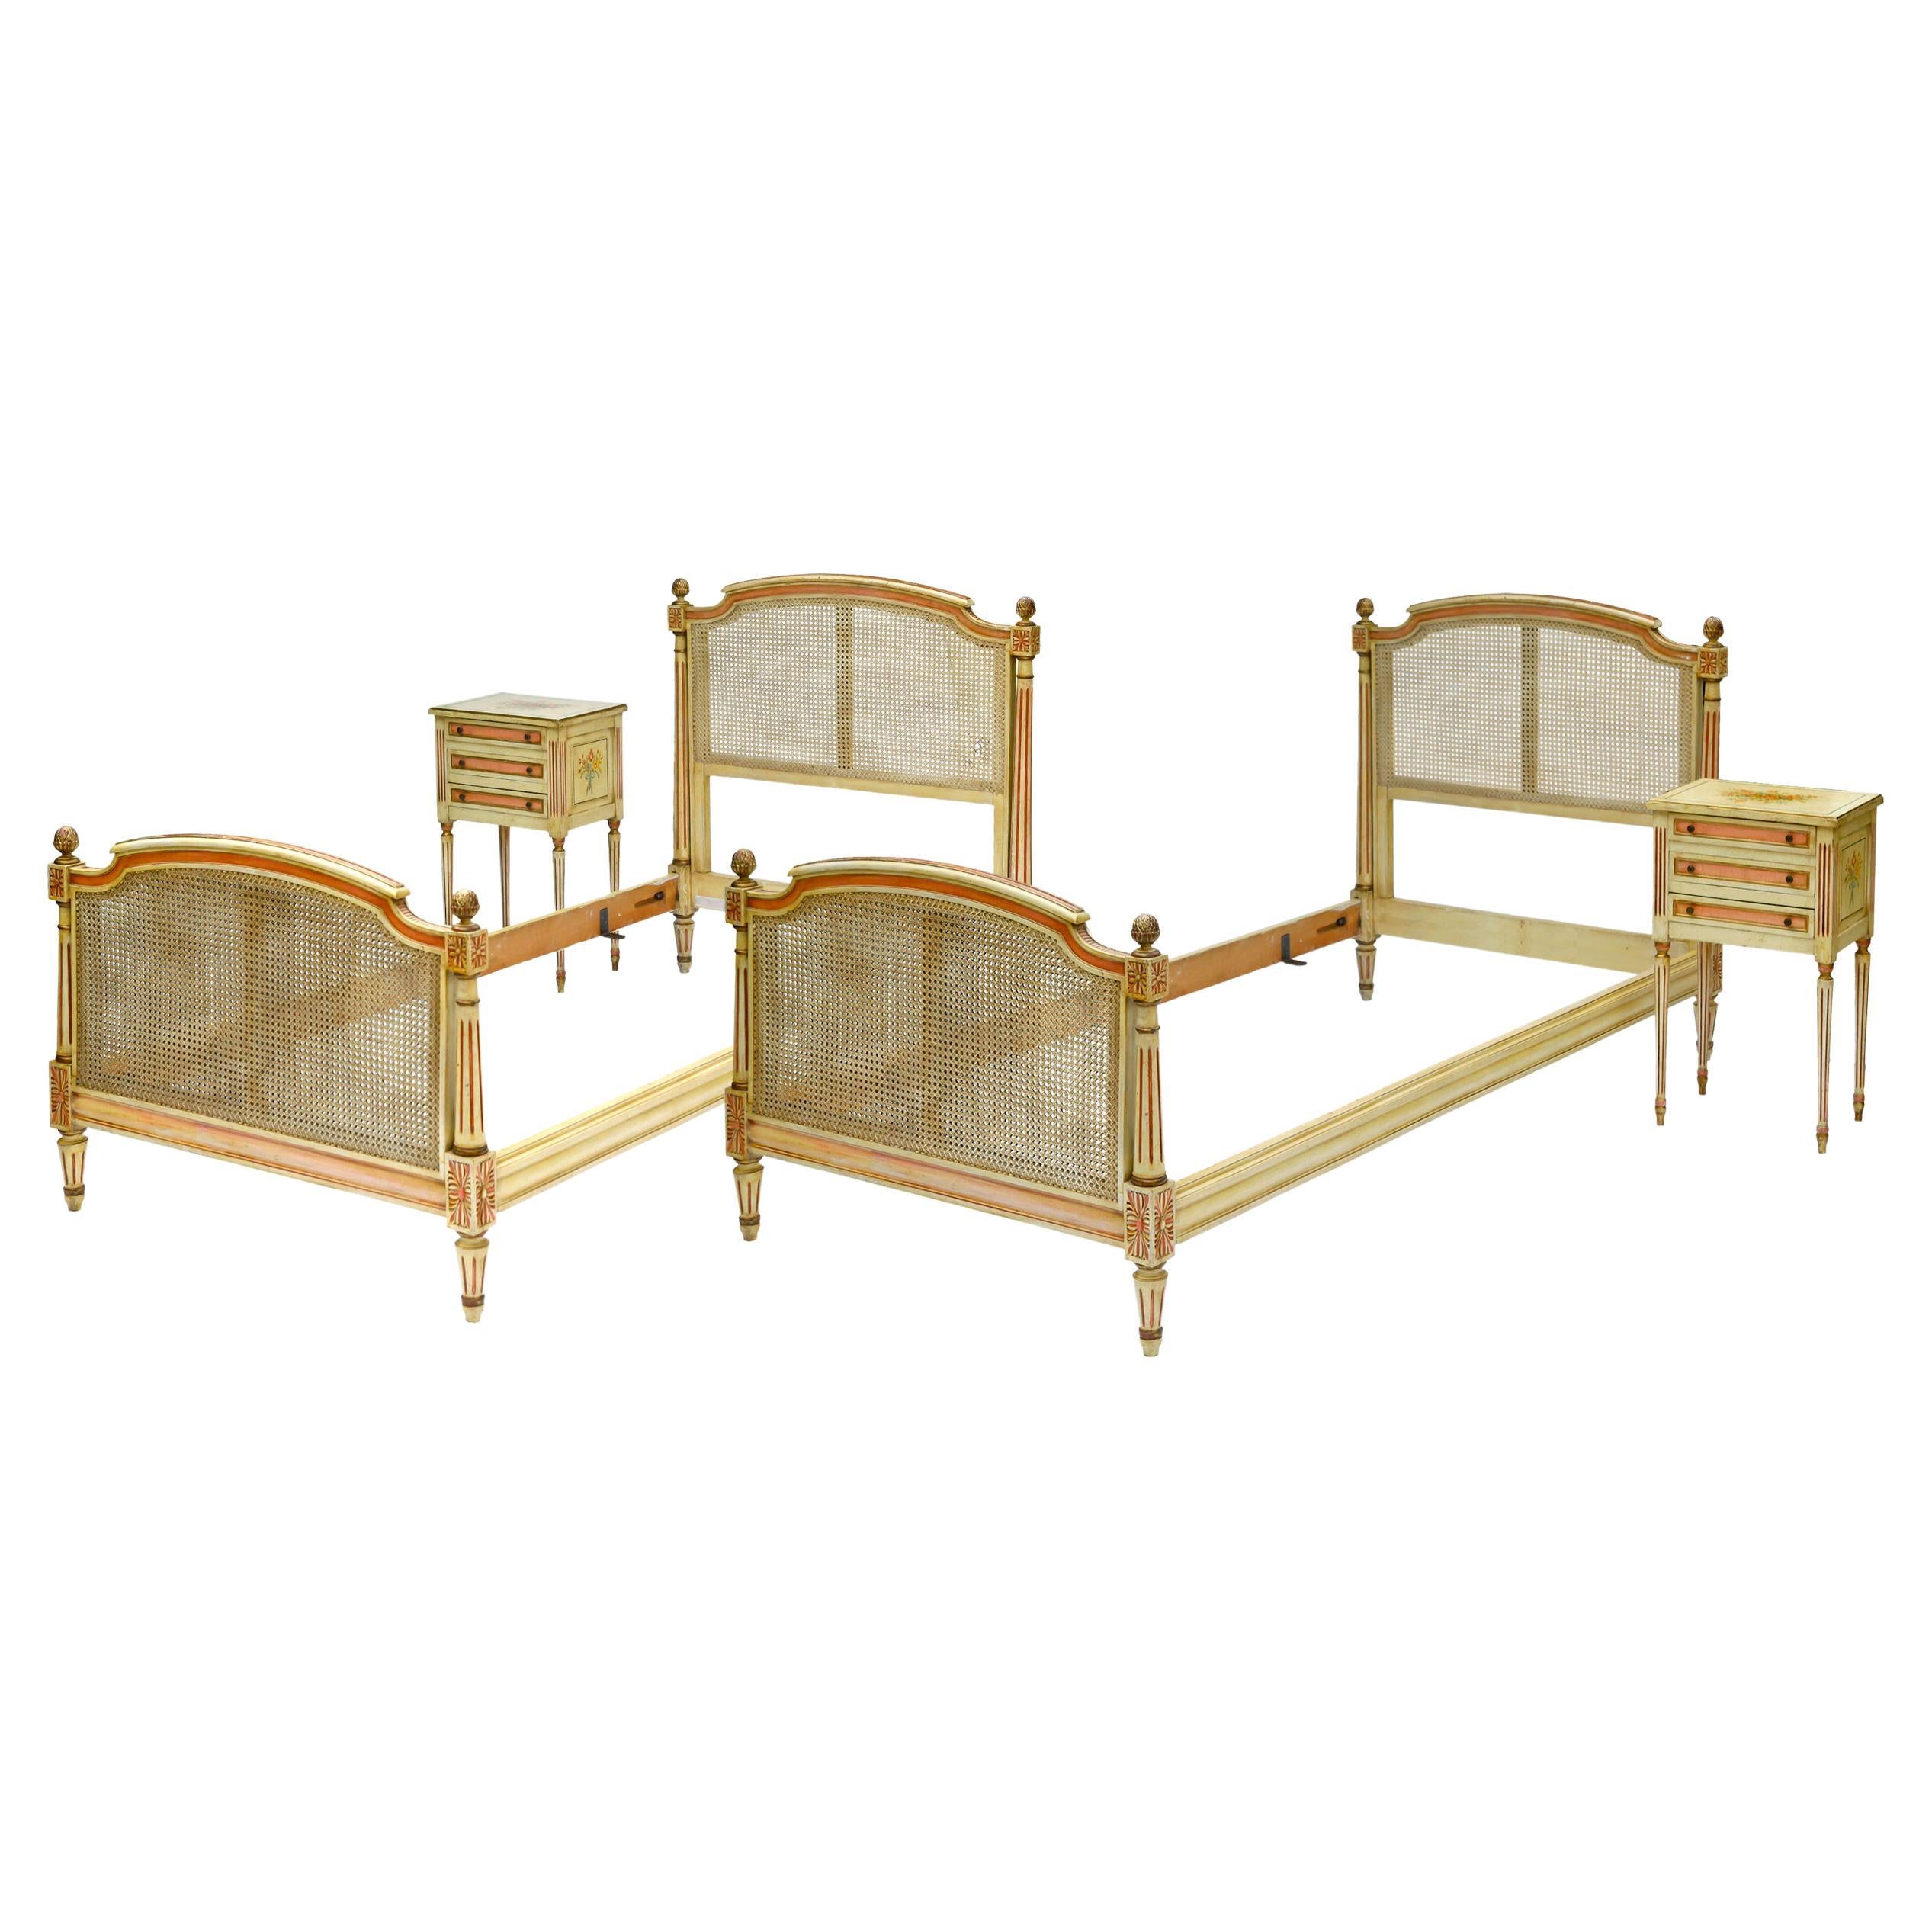 Designer French Provincial Beds & Commodes; 4 piece set In Good Condition In Malibu, CA